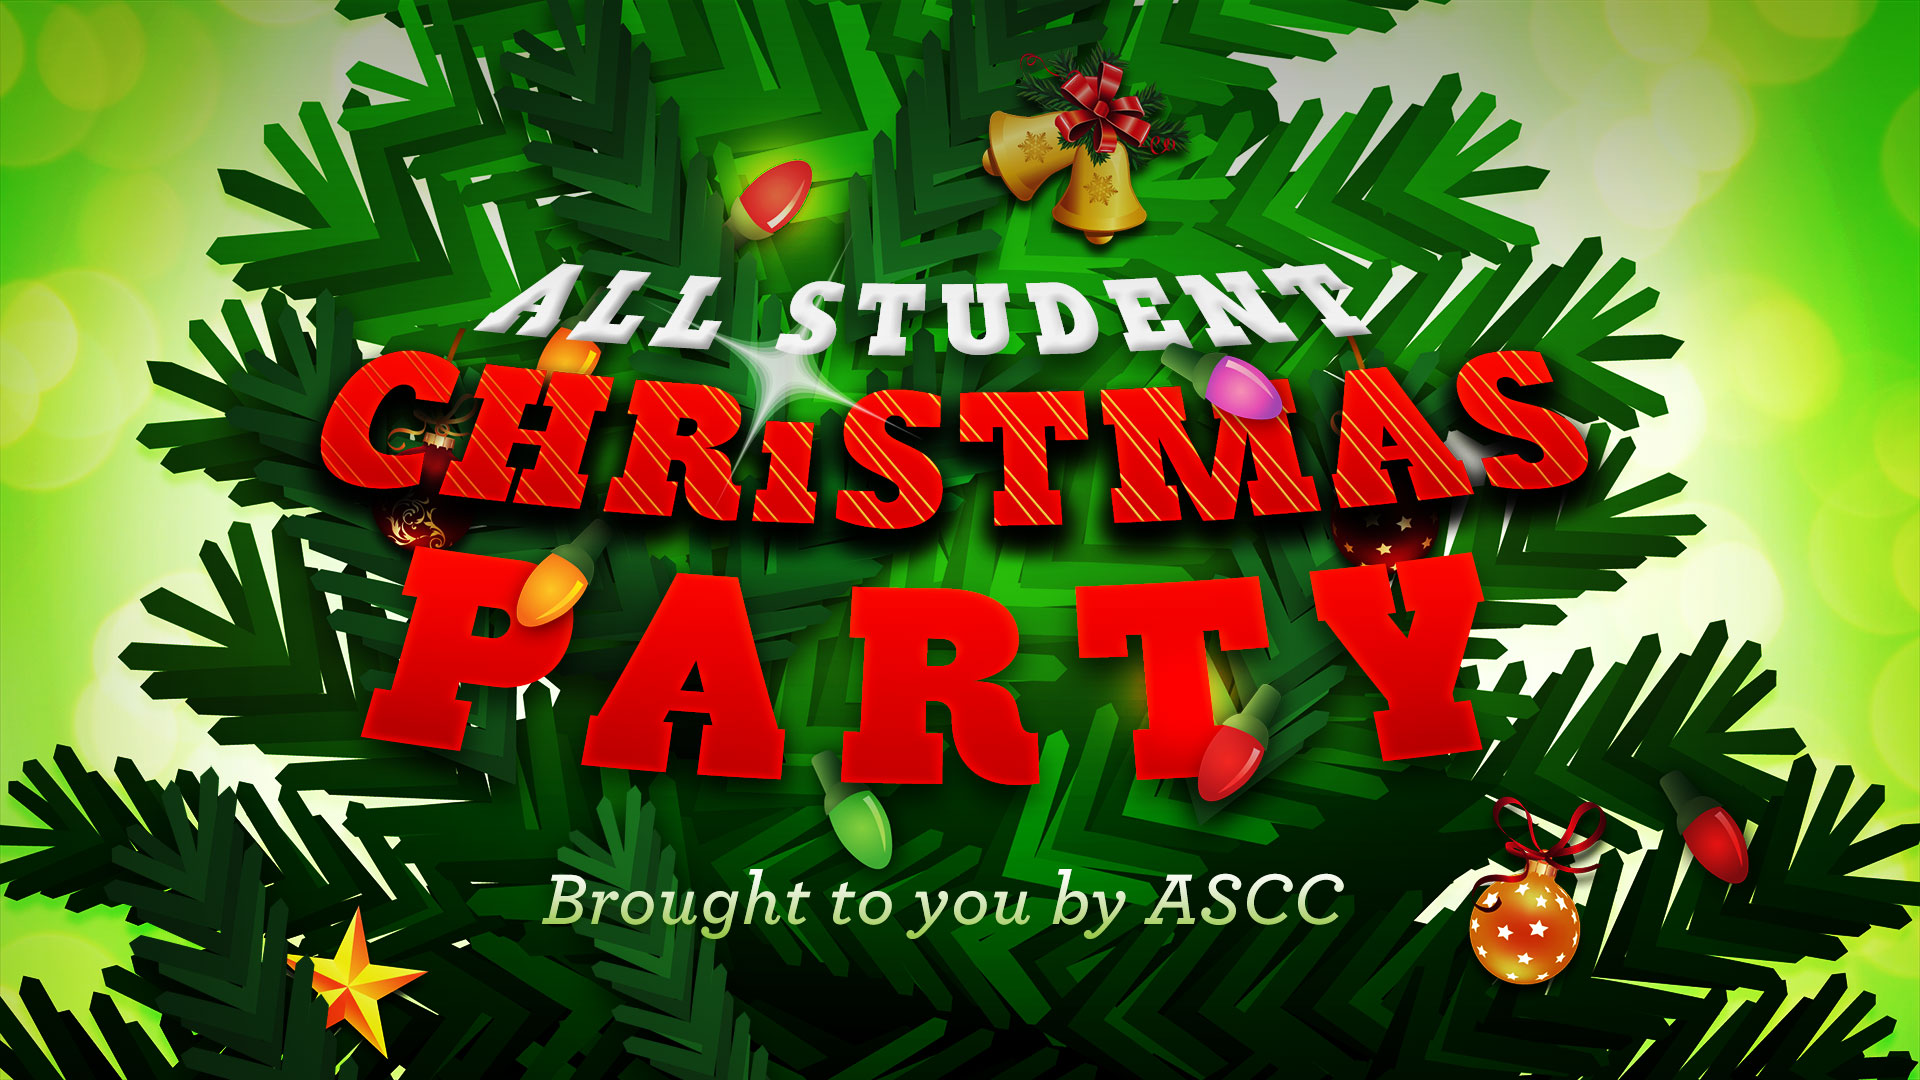 All Student Christmas Party